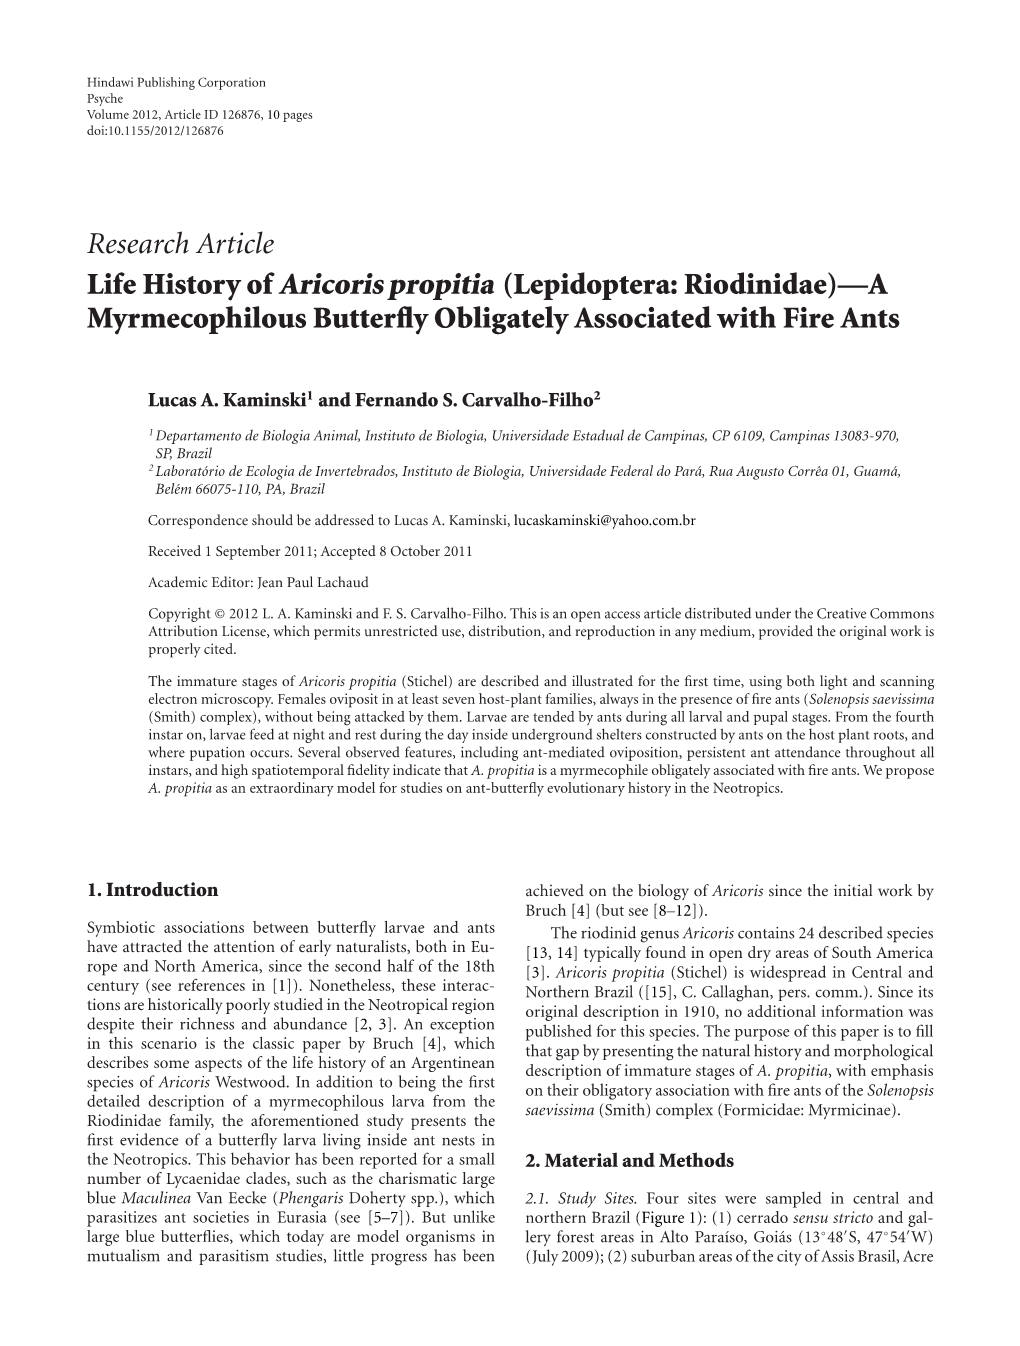 Life History of Aricoris Propitia (Lepidoptera: Riodinidae)—A Myrmecophilous Butterﬂy Obligately Associated with Fire Ants